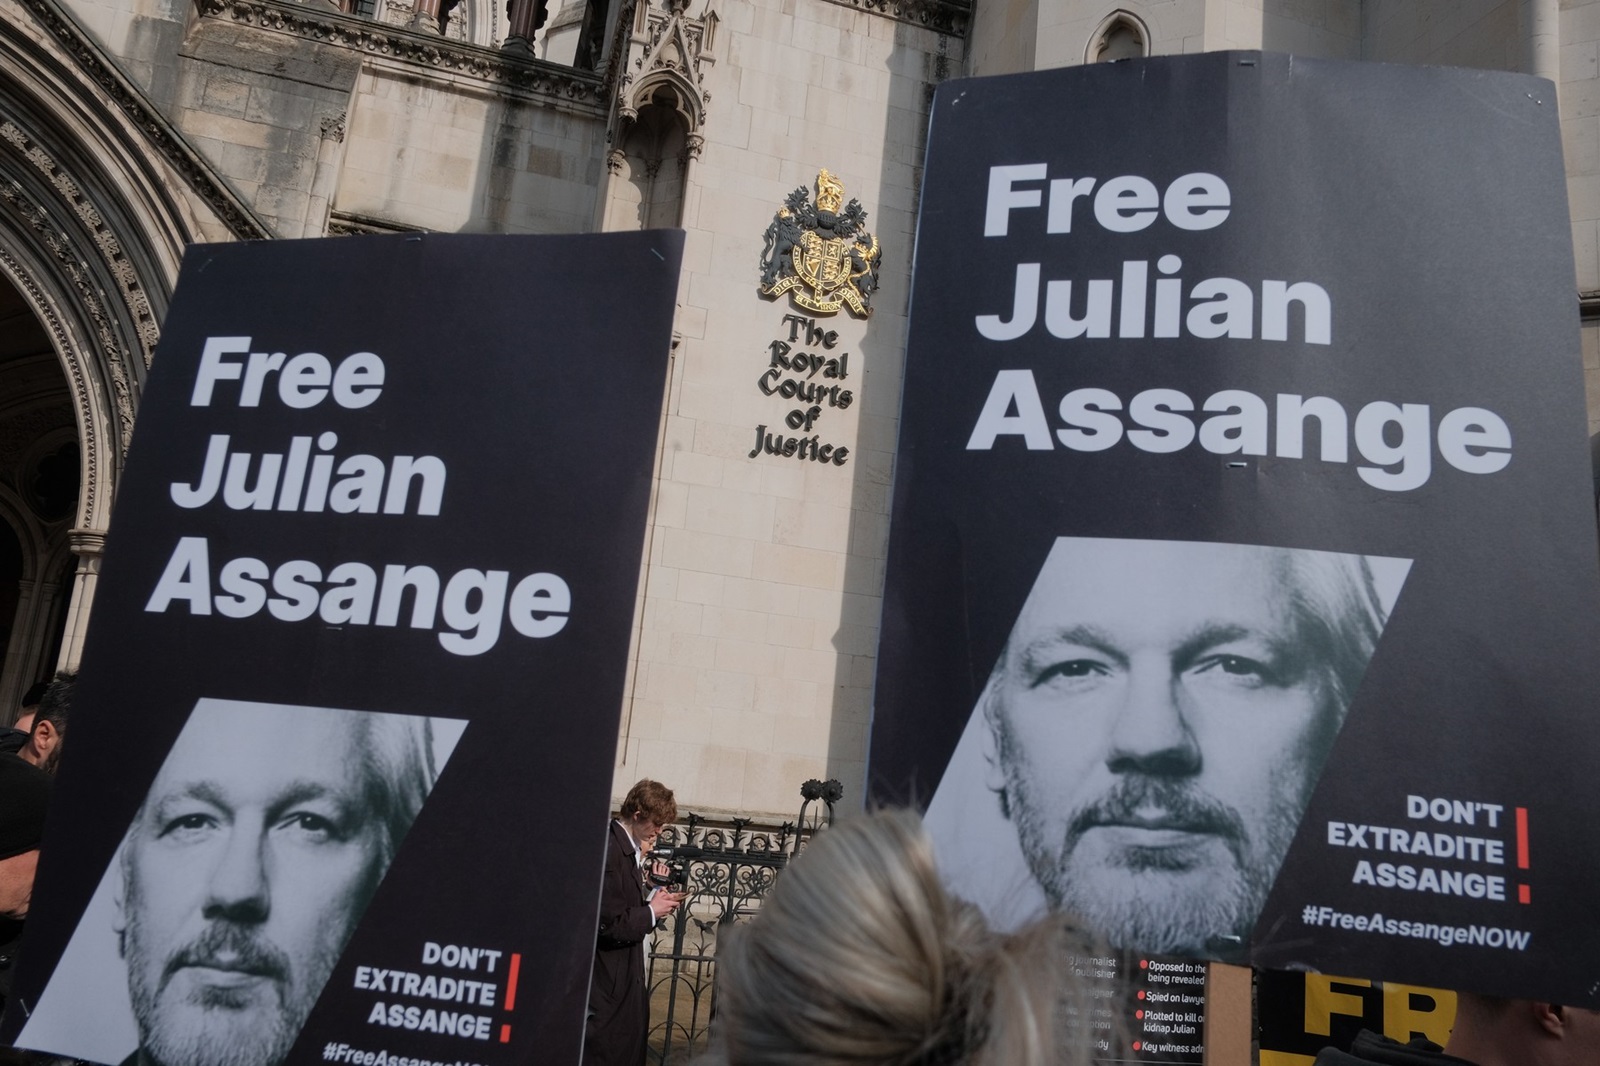 In the heart of London, a significant gathering is underway at the Royal Courts of Justice on Strand, where supporters of Julian Assange convene for the “Protest to Defend a Free Press Decision Day.” This event marks the final appeal decision concerning Assange’s extradition case. The atmosphere is charged with anticipation as attendees, from various walks of life, unite in their call for press freedom and transparency.,Image: 859702034, License: Rights-managed, Restrictions: , Model Release: no, Credit line: Joao Daniel Pereira/Atlântico P / - / Profimedia